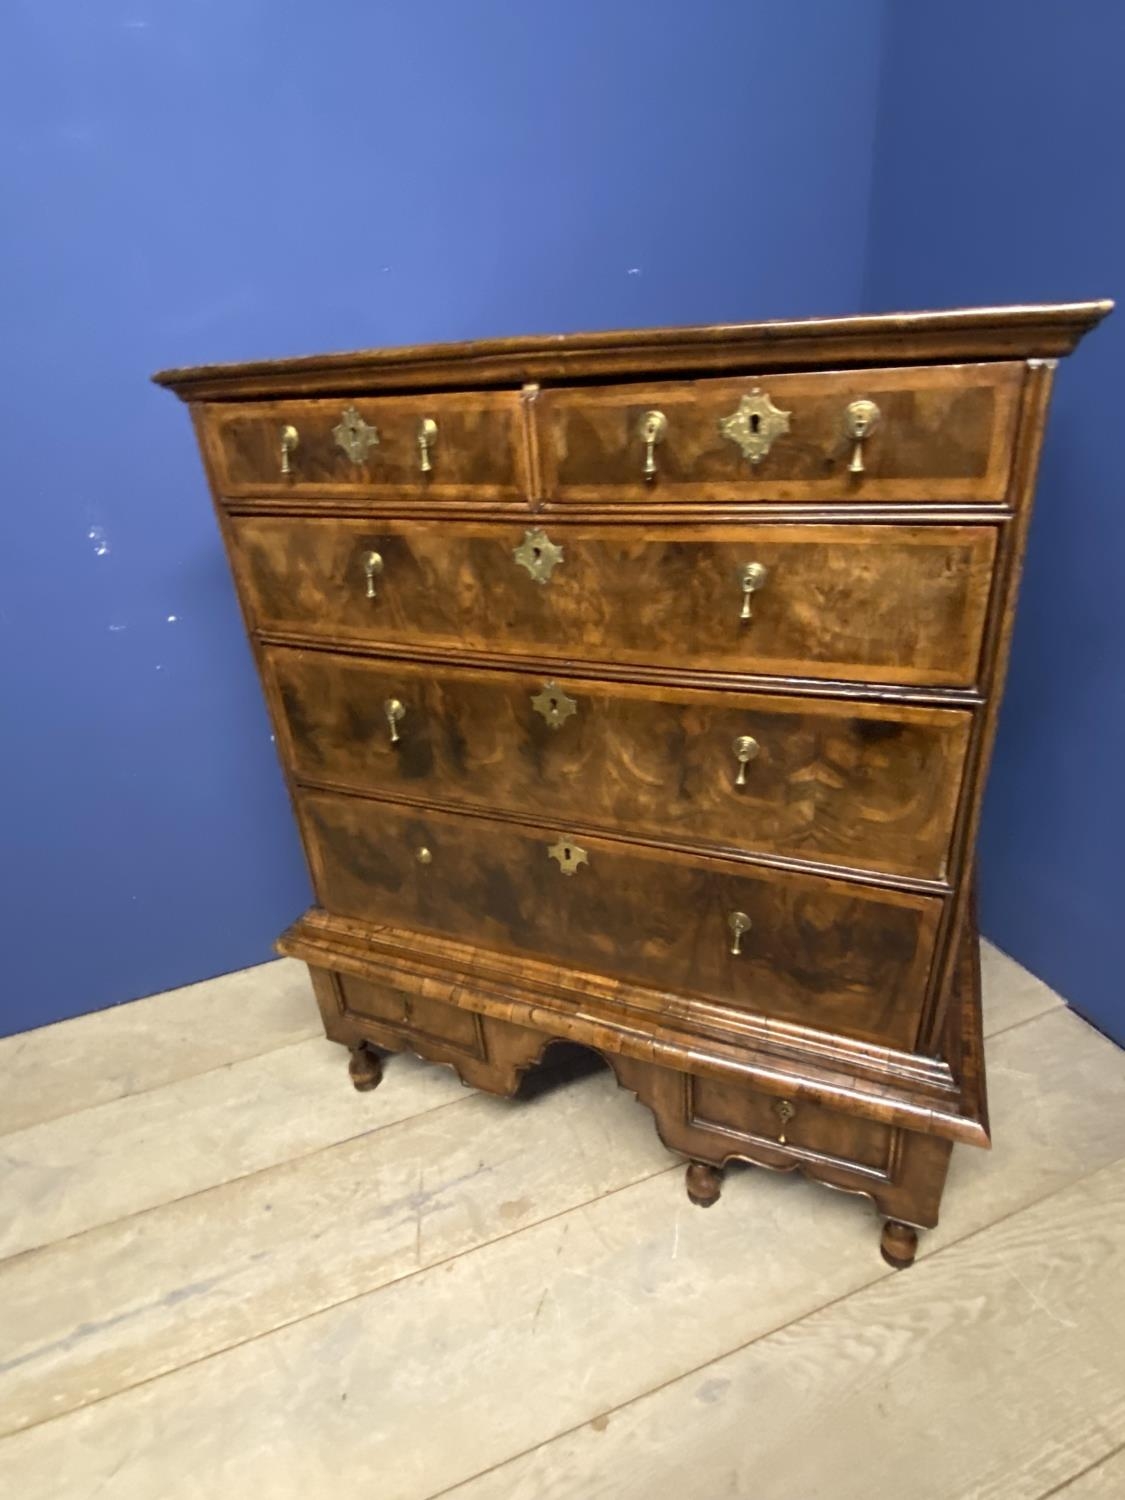 Queen Anne style walnut chest on raised legs (possibly parts not associated) one leg missing at